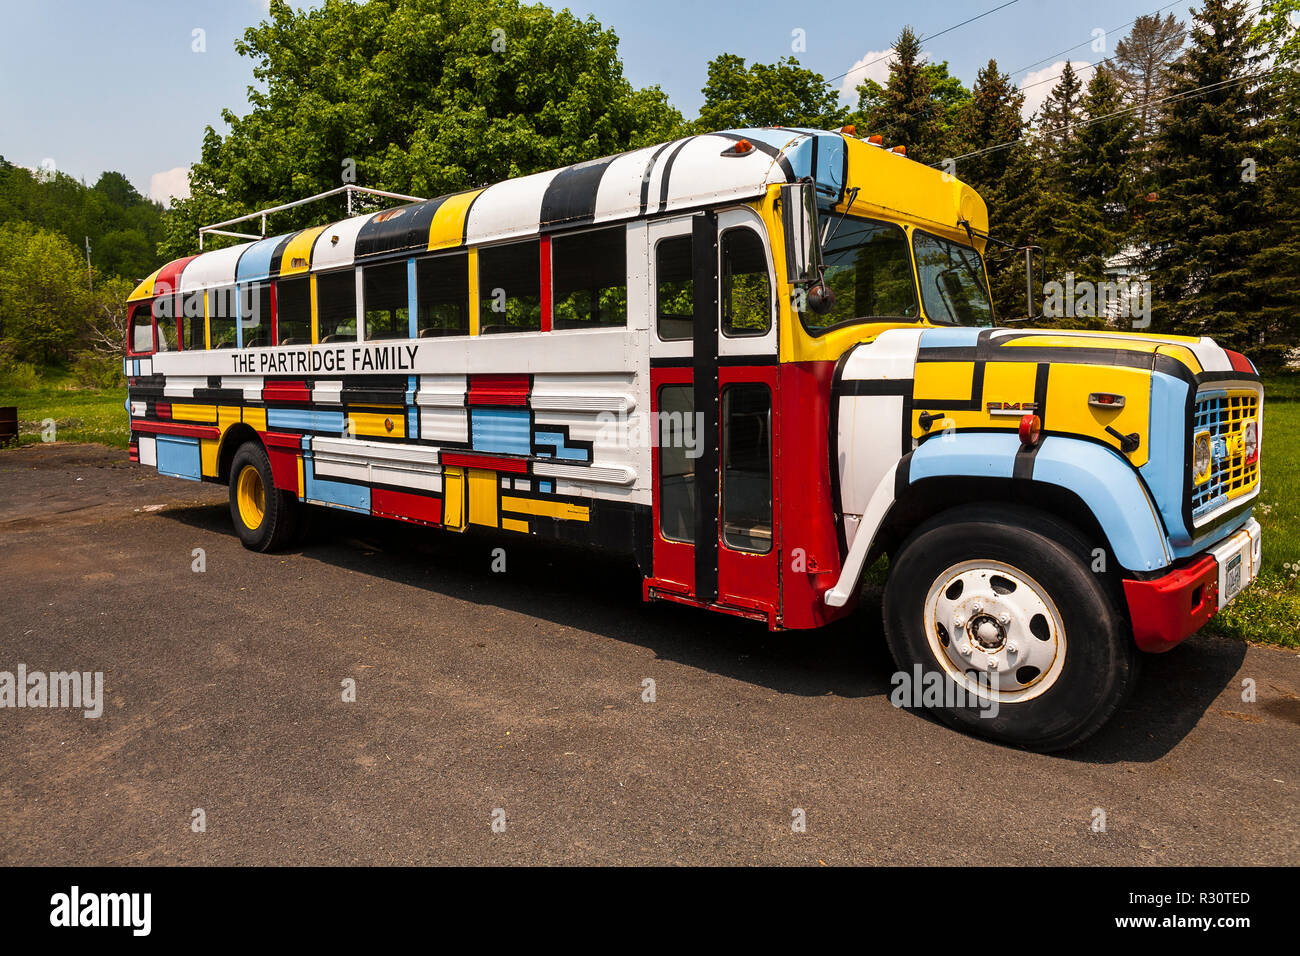 replica-partridge-family-tv-show-school-bus-painted-in-style-of-dutch-painter-piet-mondrian-R30TED.jpg